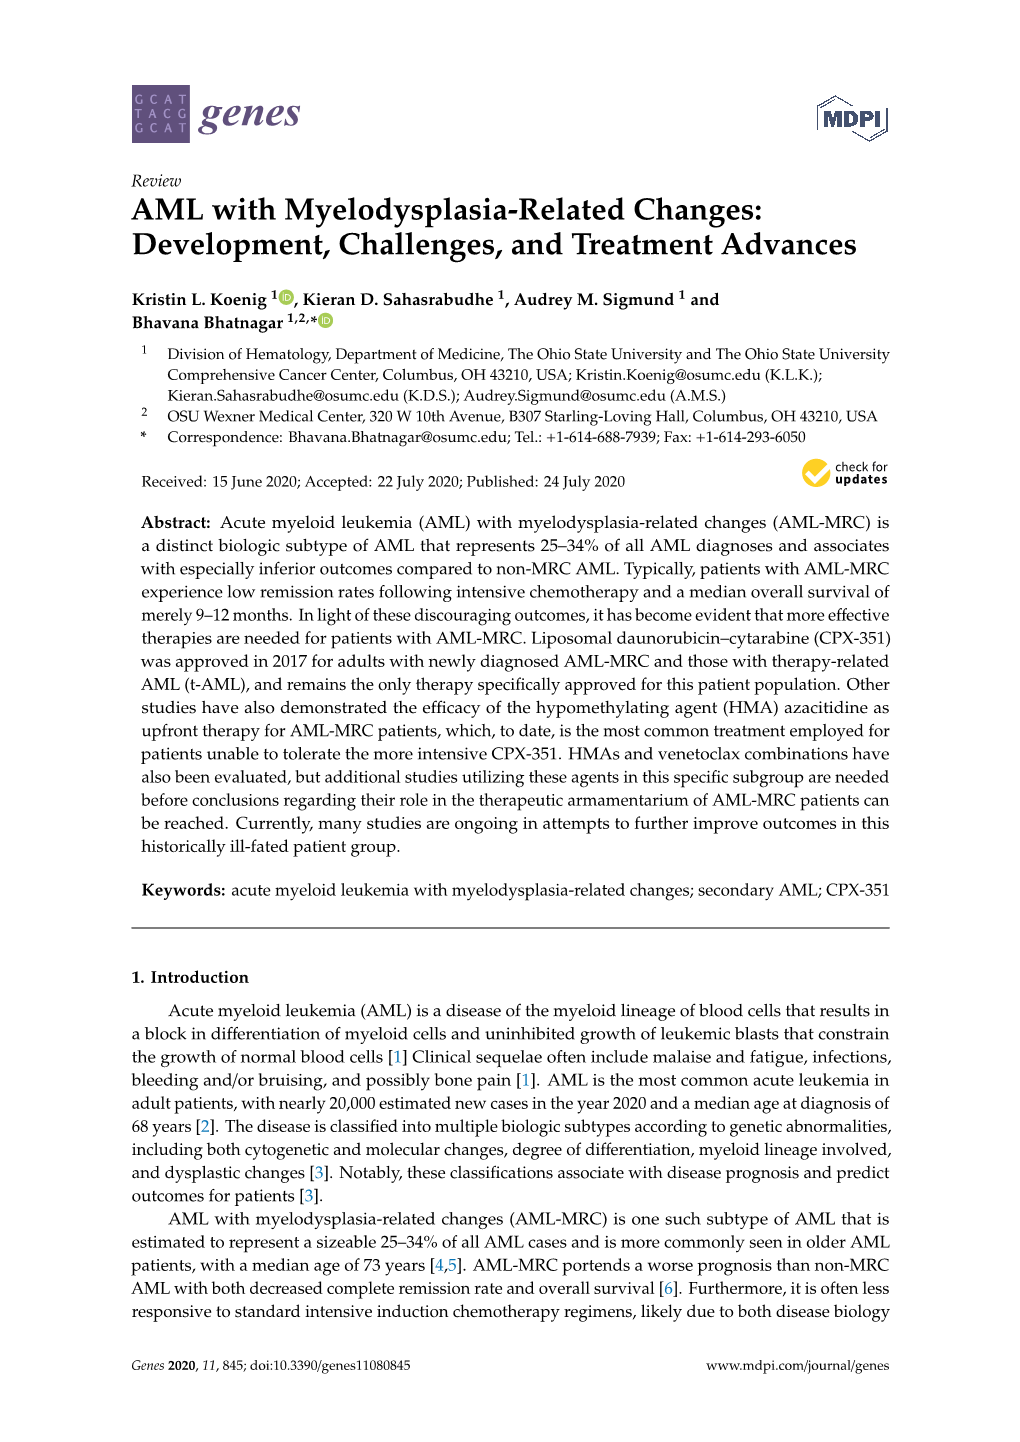 AML with Myelodysplasia-Related Changes: Development, Challenges, and Treatment Advances